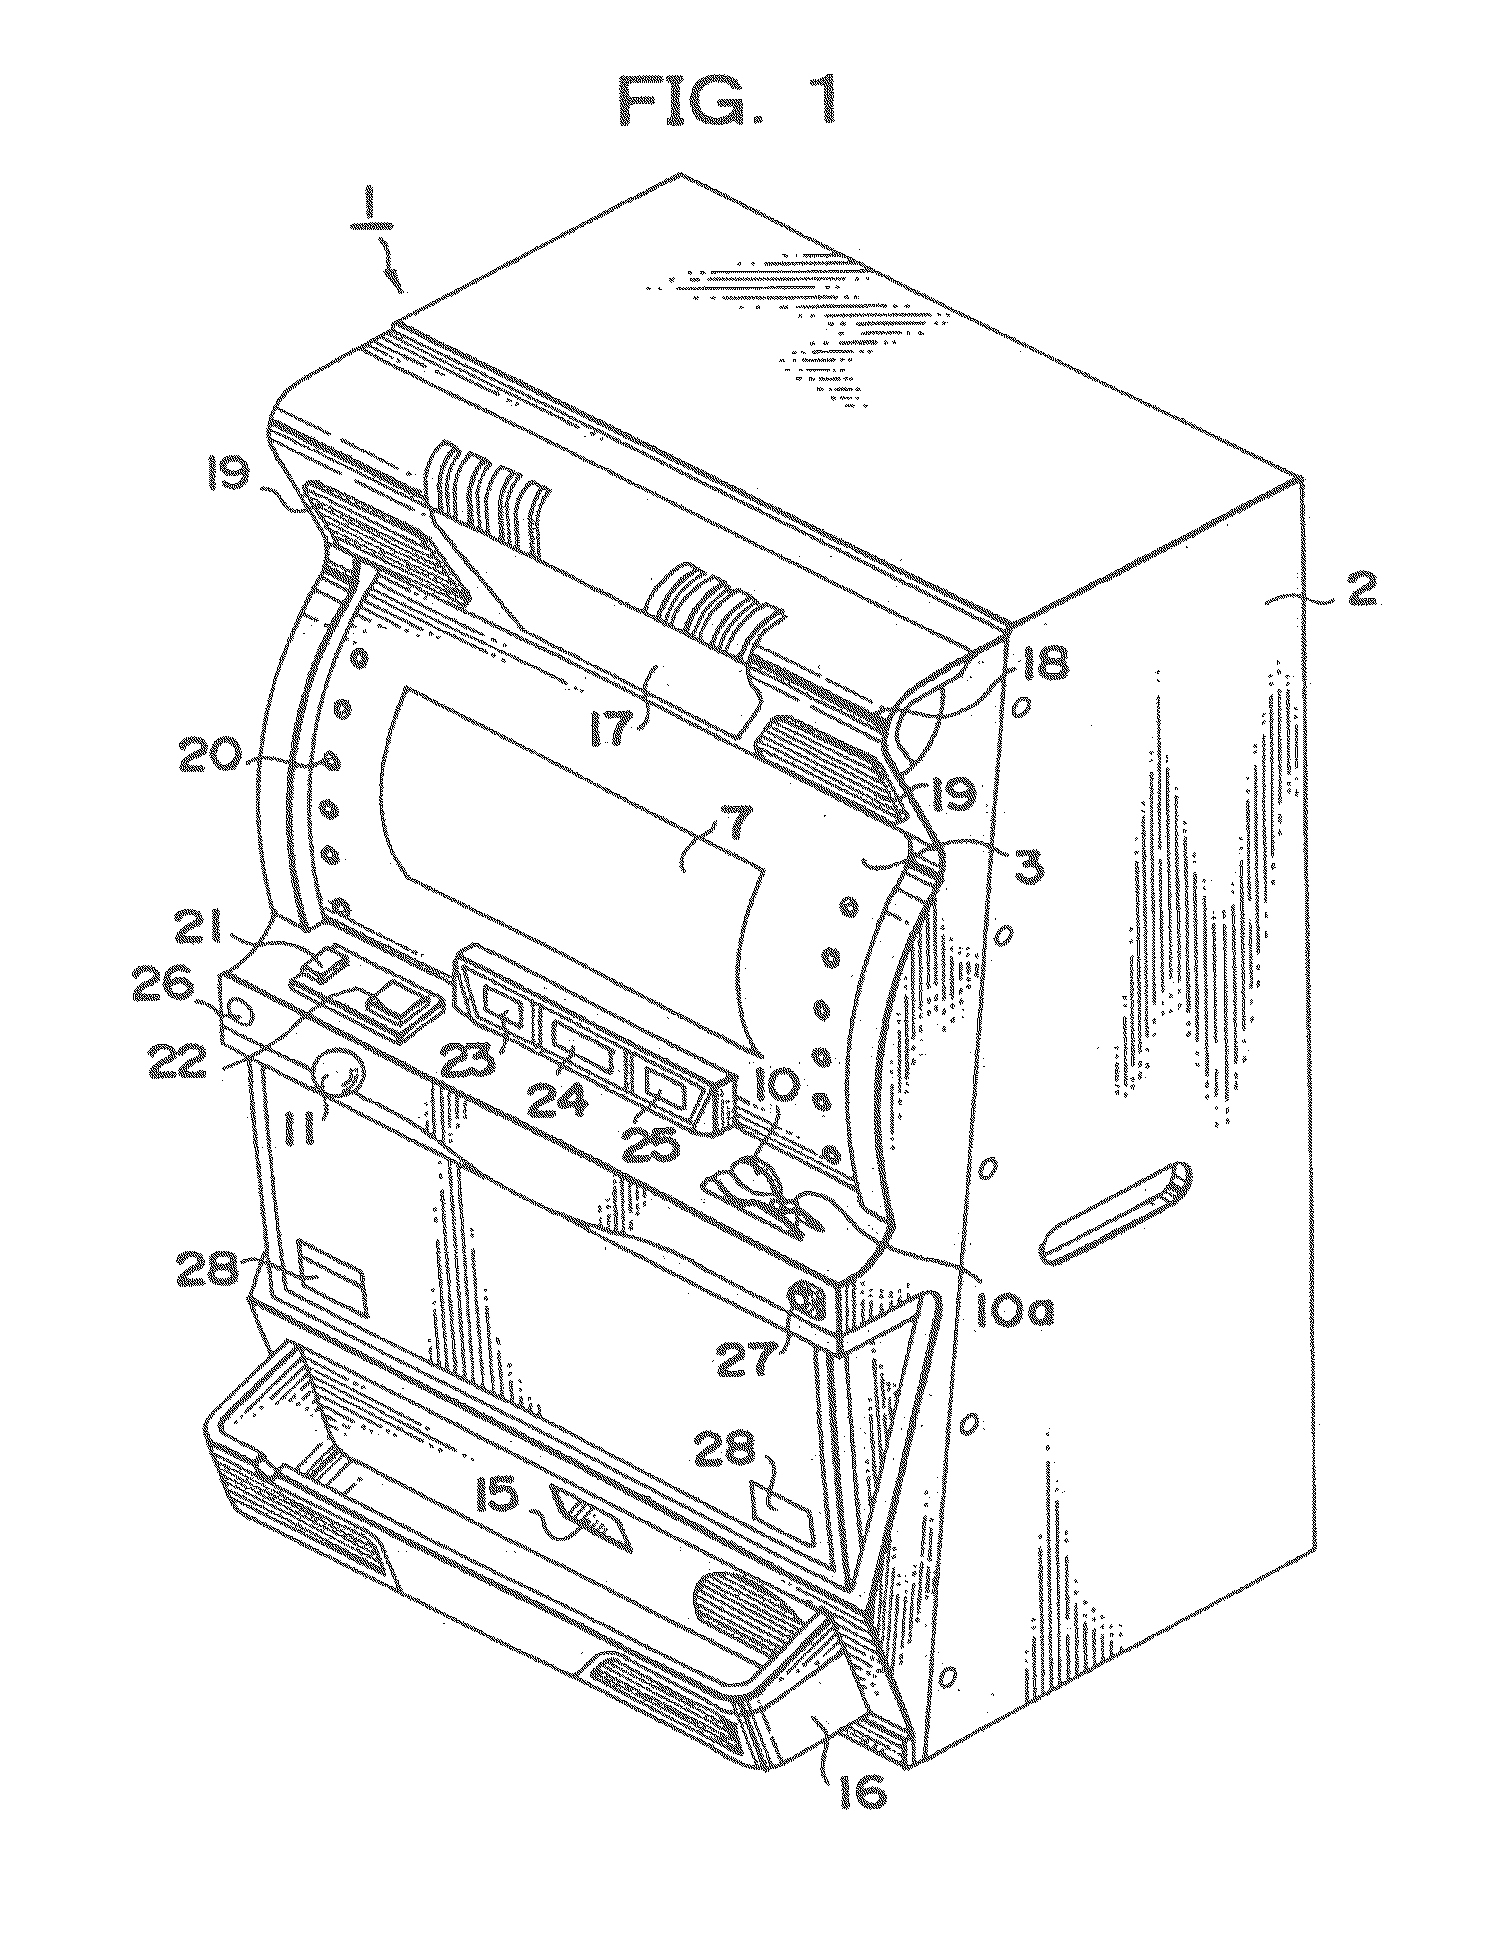 Gaming machine and methods of allowing a player to play gaming machines having modifiable reel features